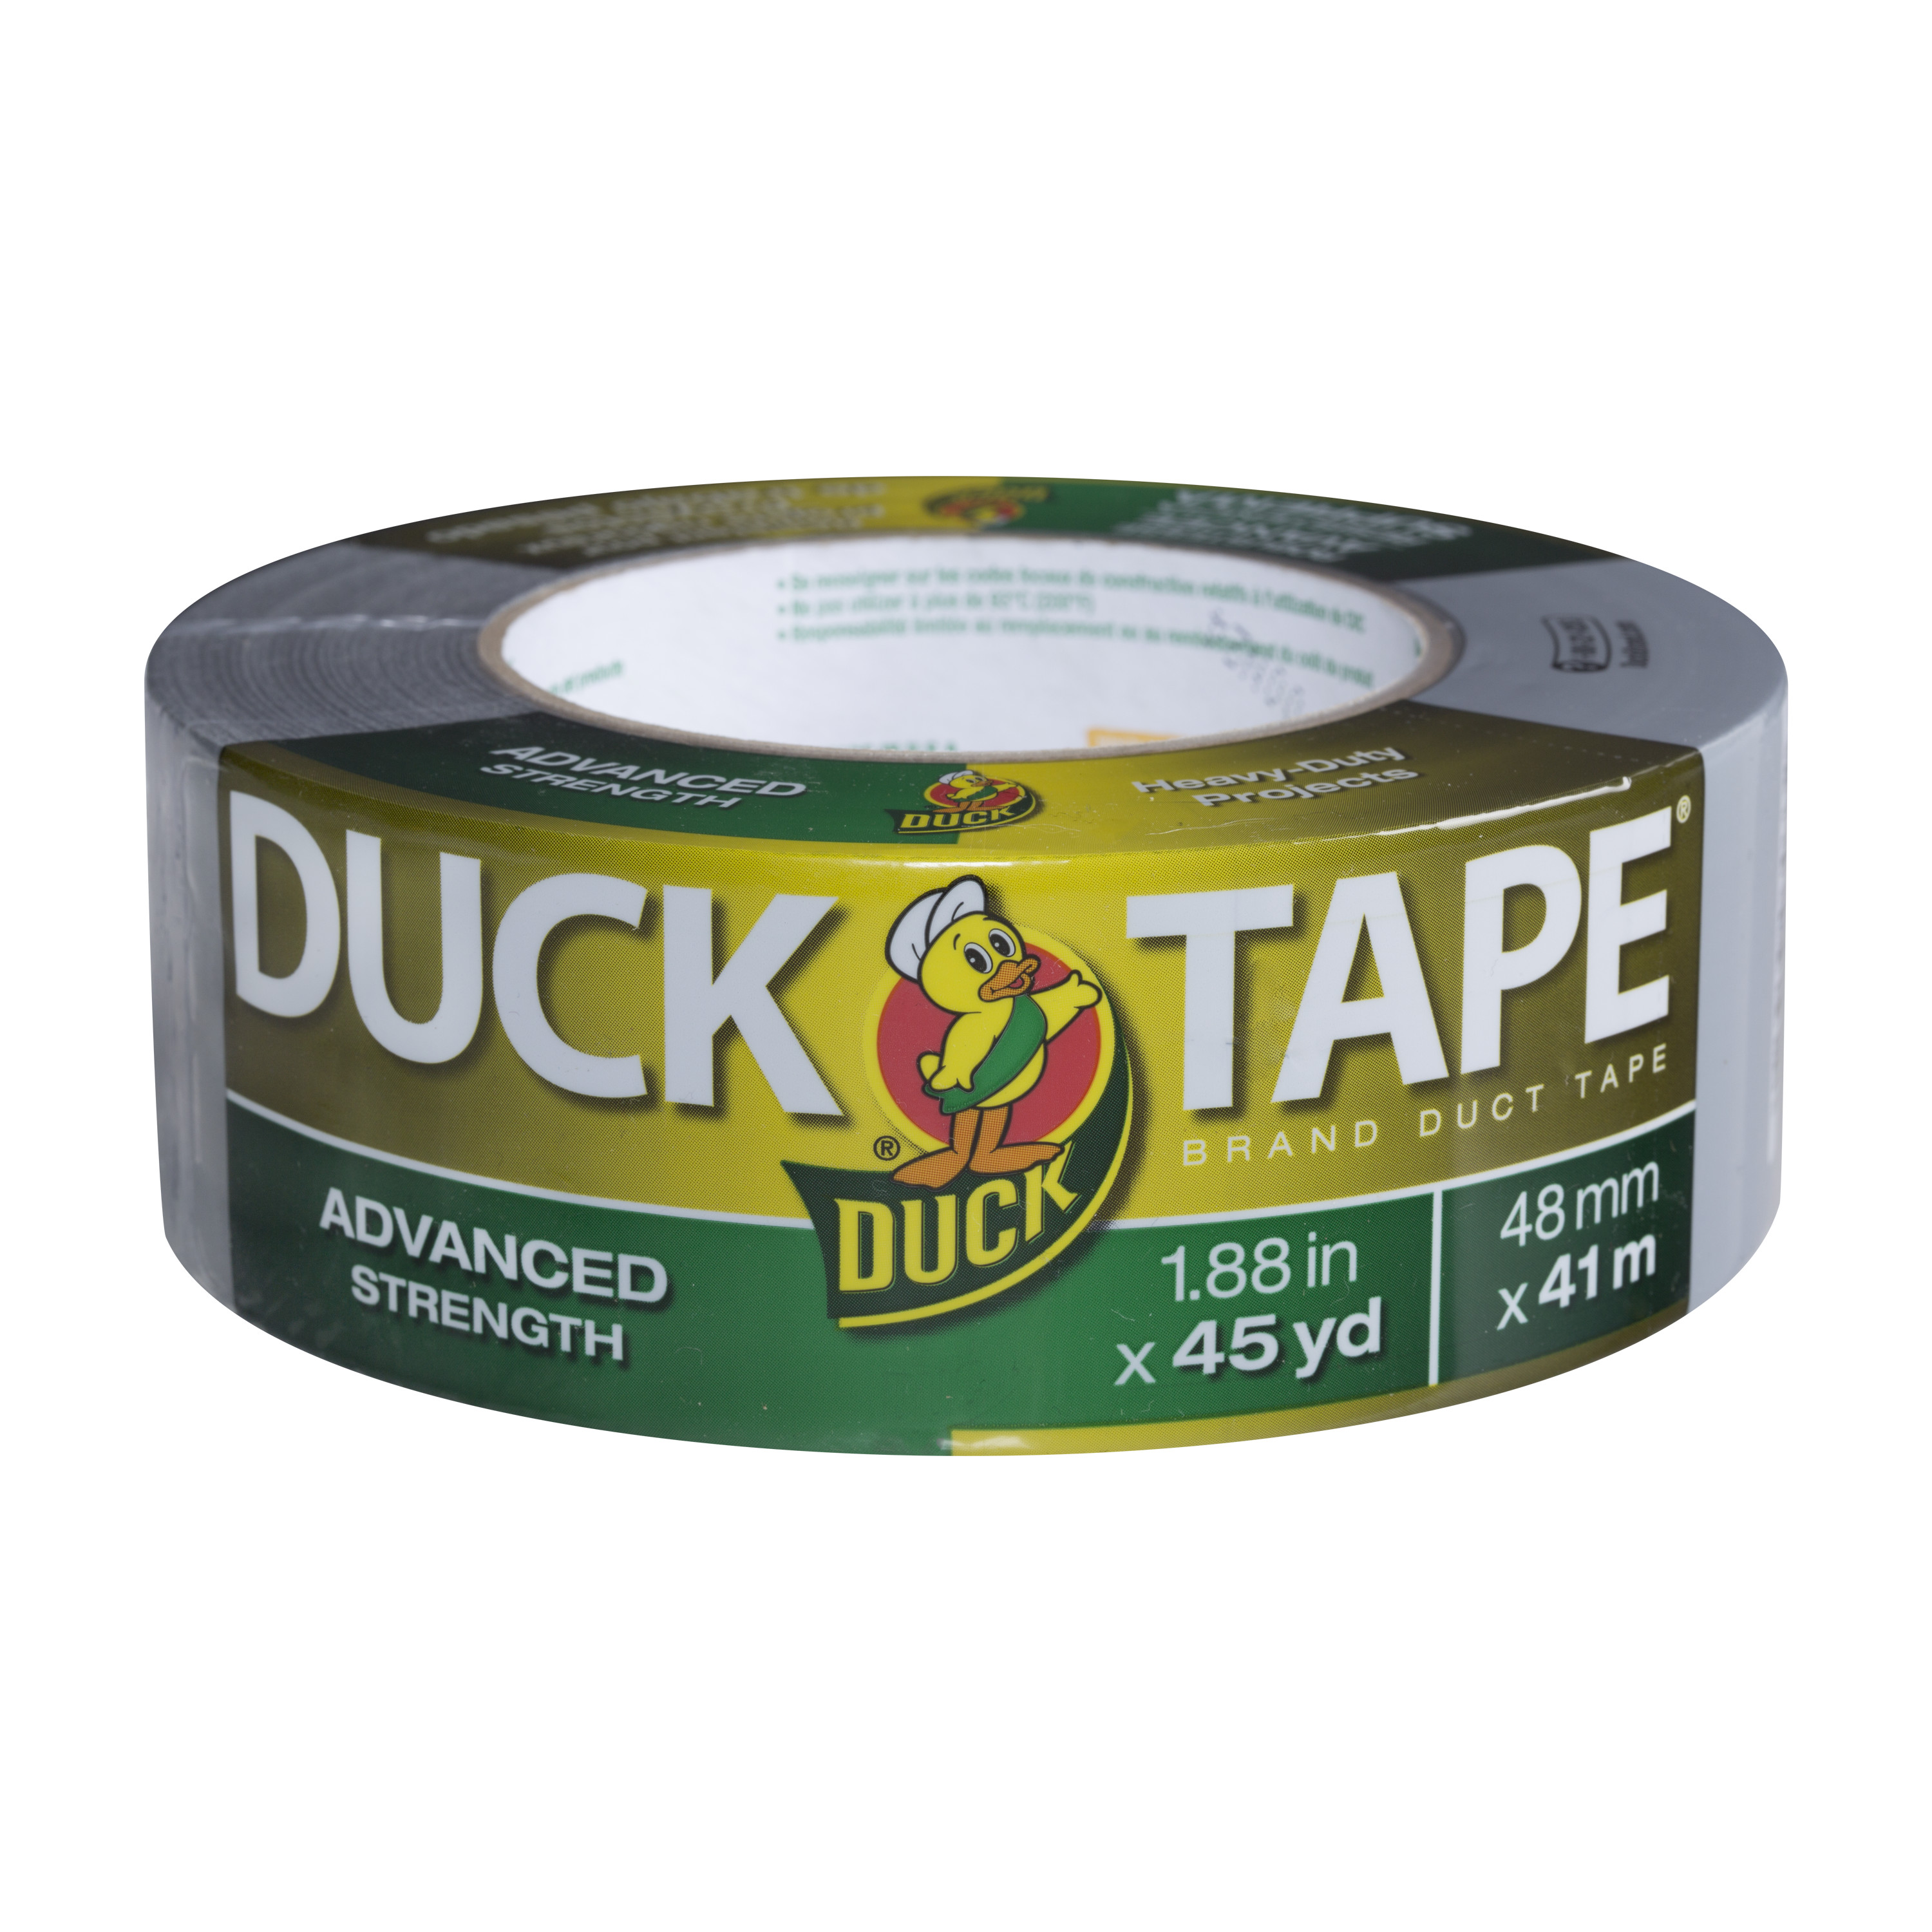 Duck Advance Strength Duct Tape, 1.88 in x 45 yd, Silver - image 1 of 10